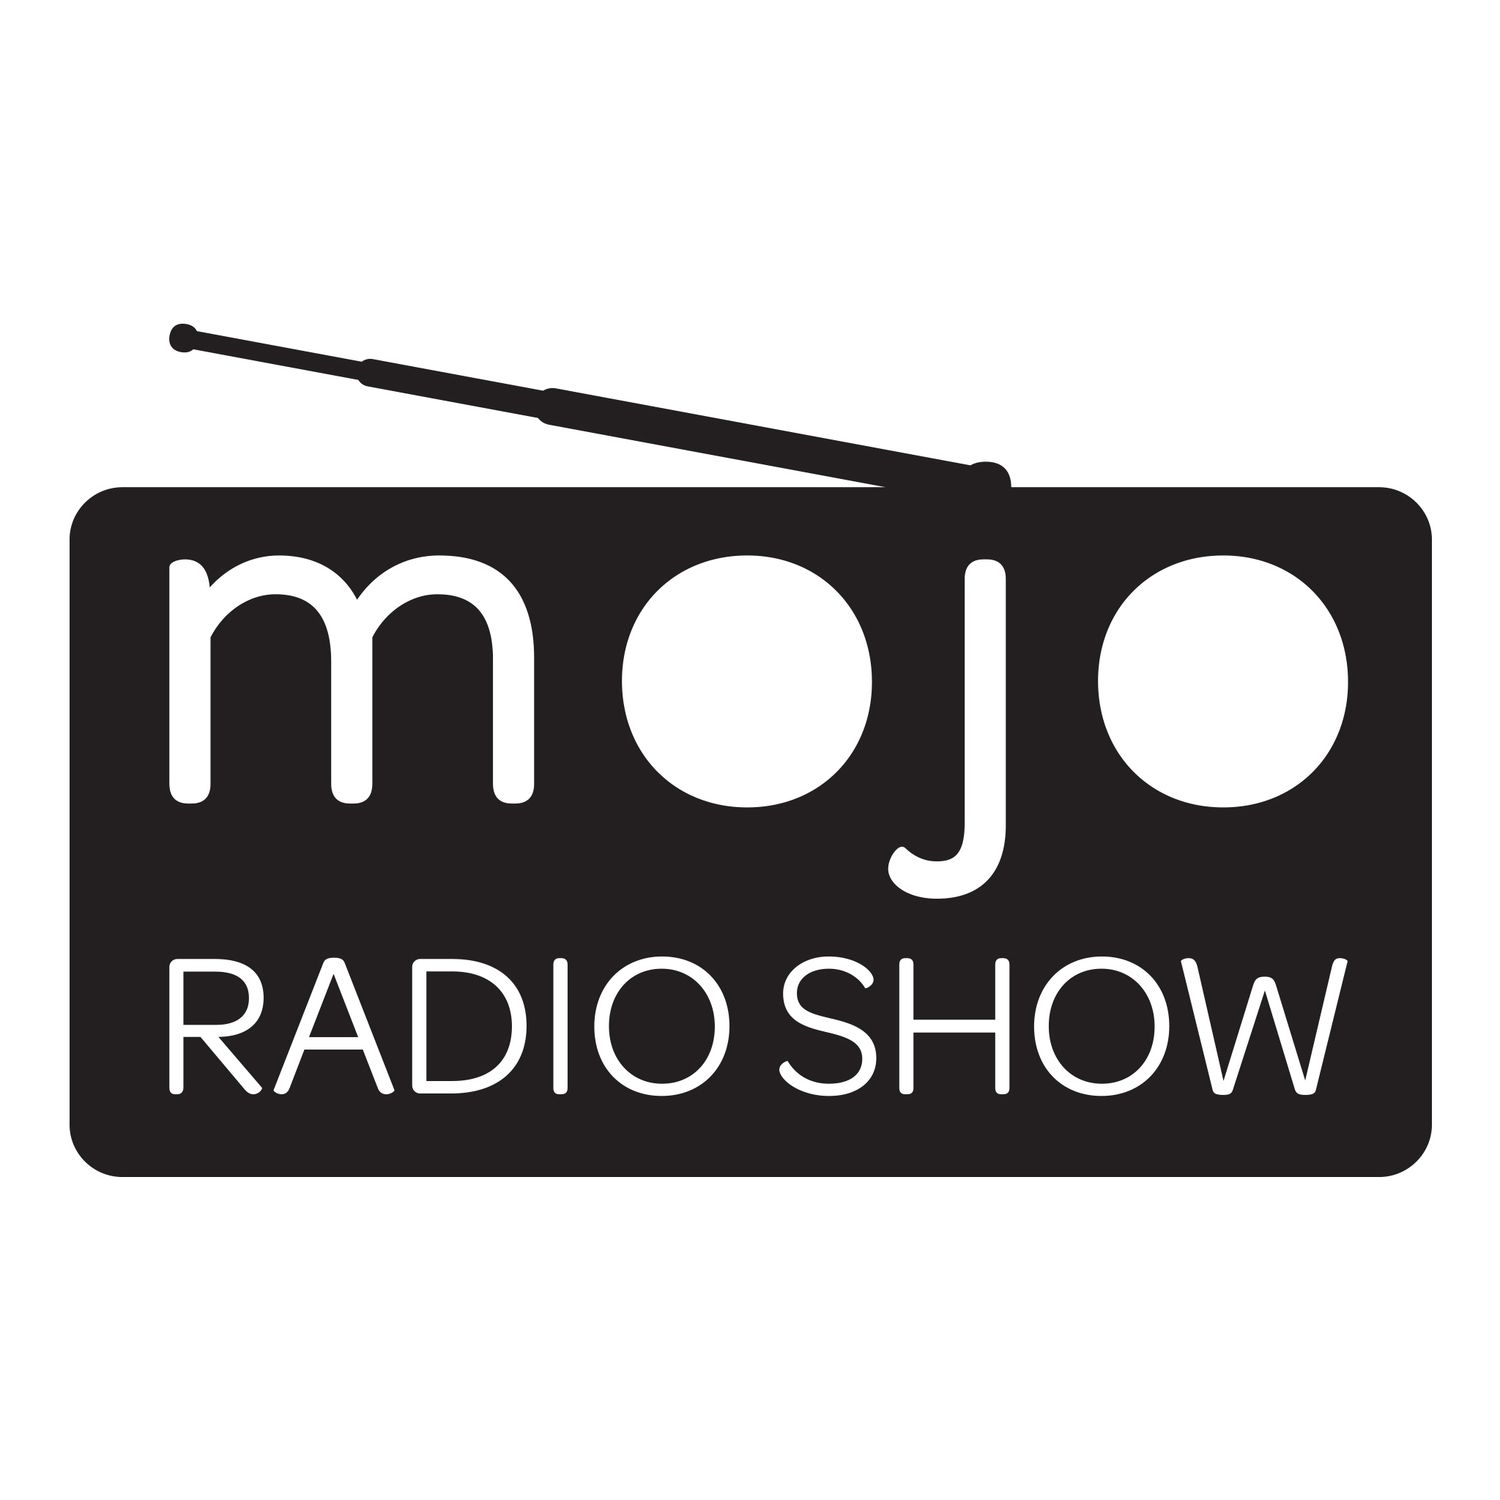 The Mojo Radio Show EP 221: The Psychology Behind Changing Disempowering Behaviours - Art Markman